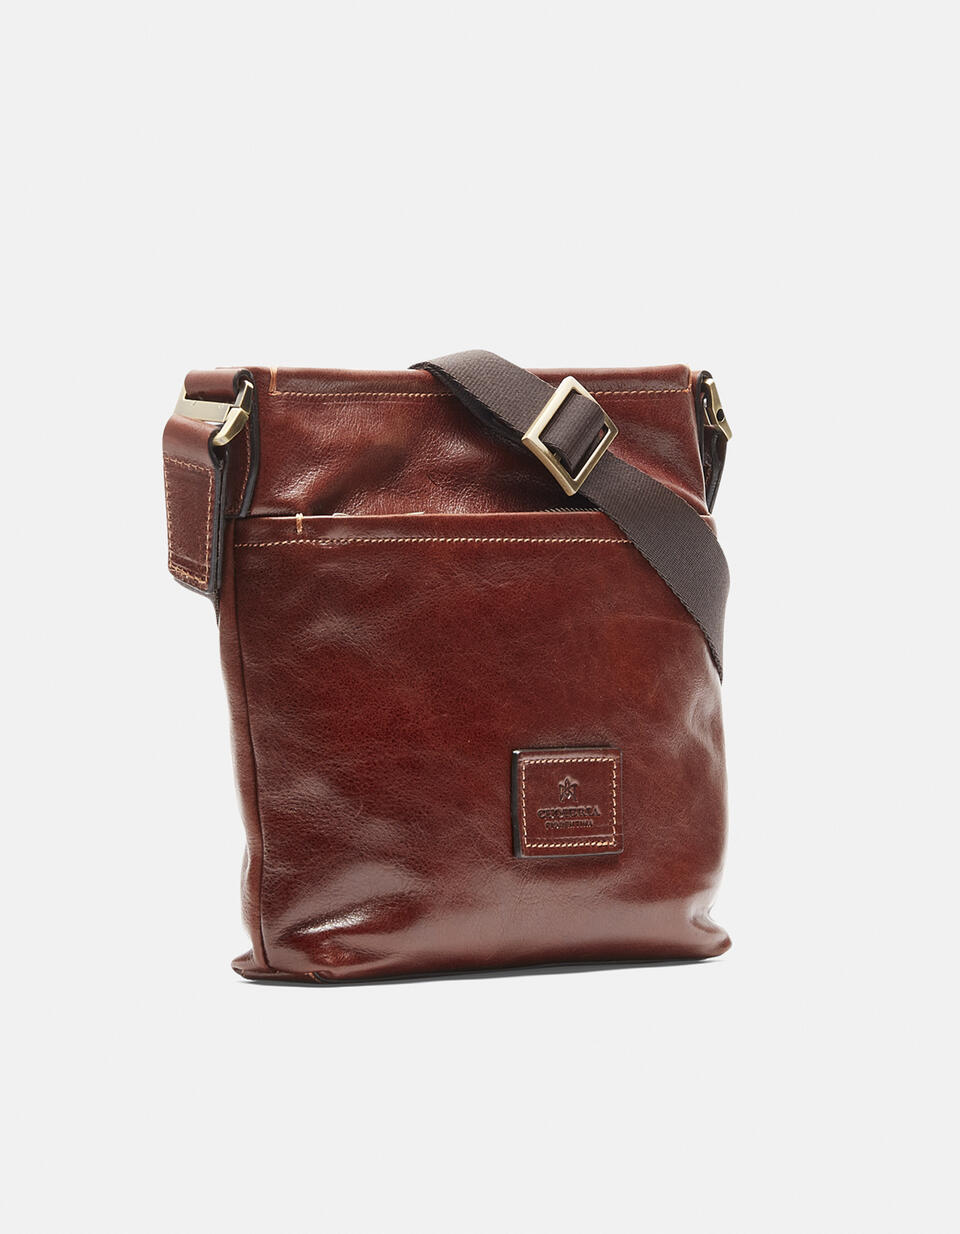 Warm and Color Shoulder strap           with front pocket - Crossbody Bags - MEN'S BAGS | bags  - Crossbody Bags - MEN'S BAGS | bagsCuoieria Fiorentina